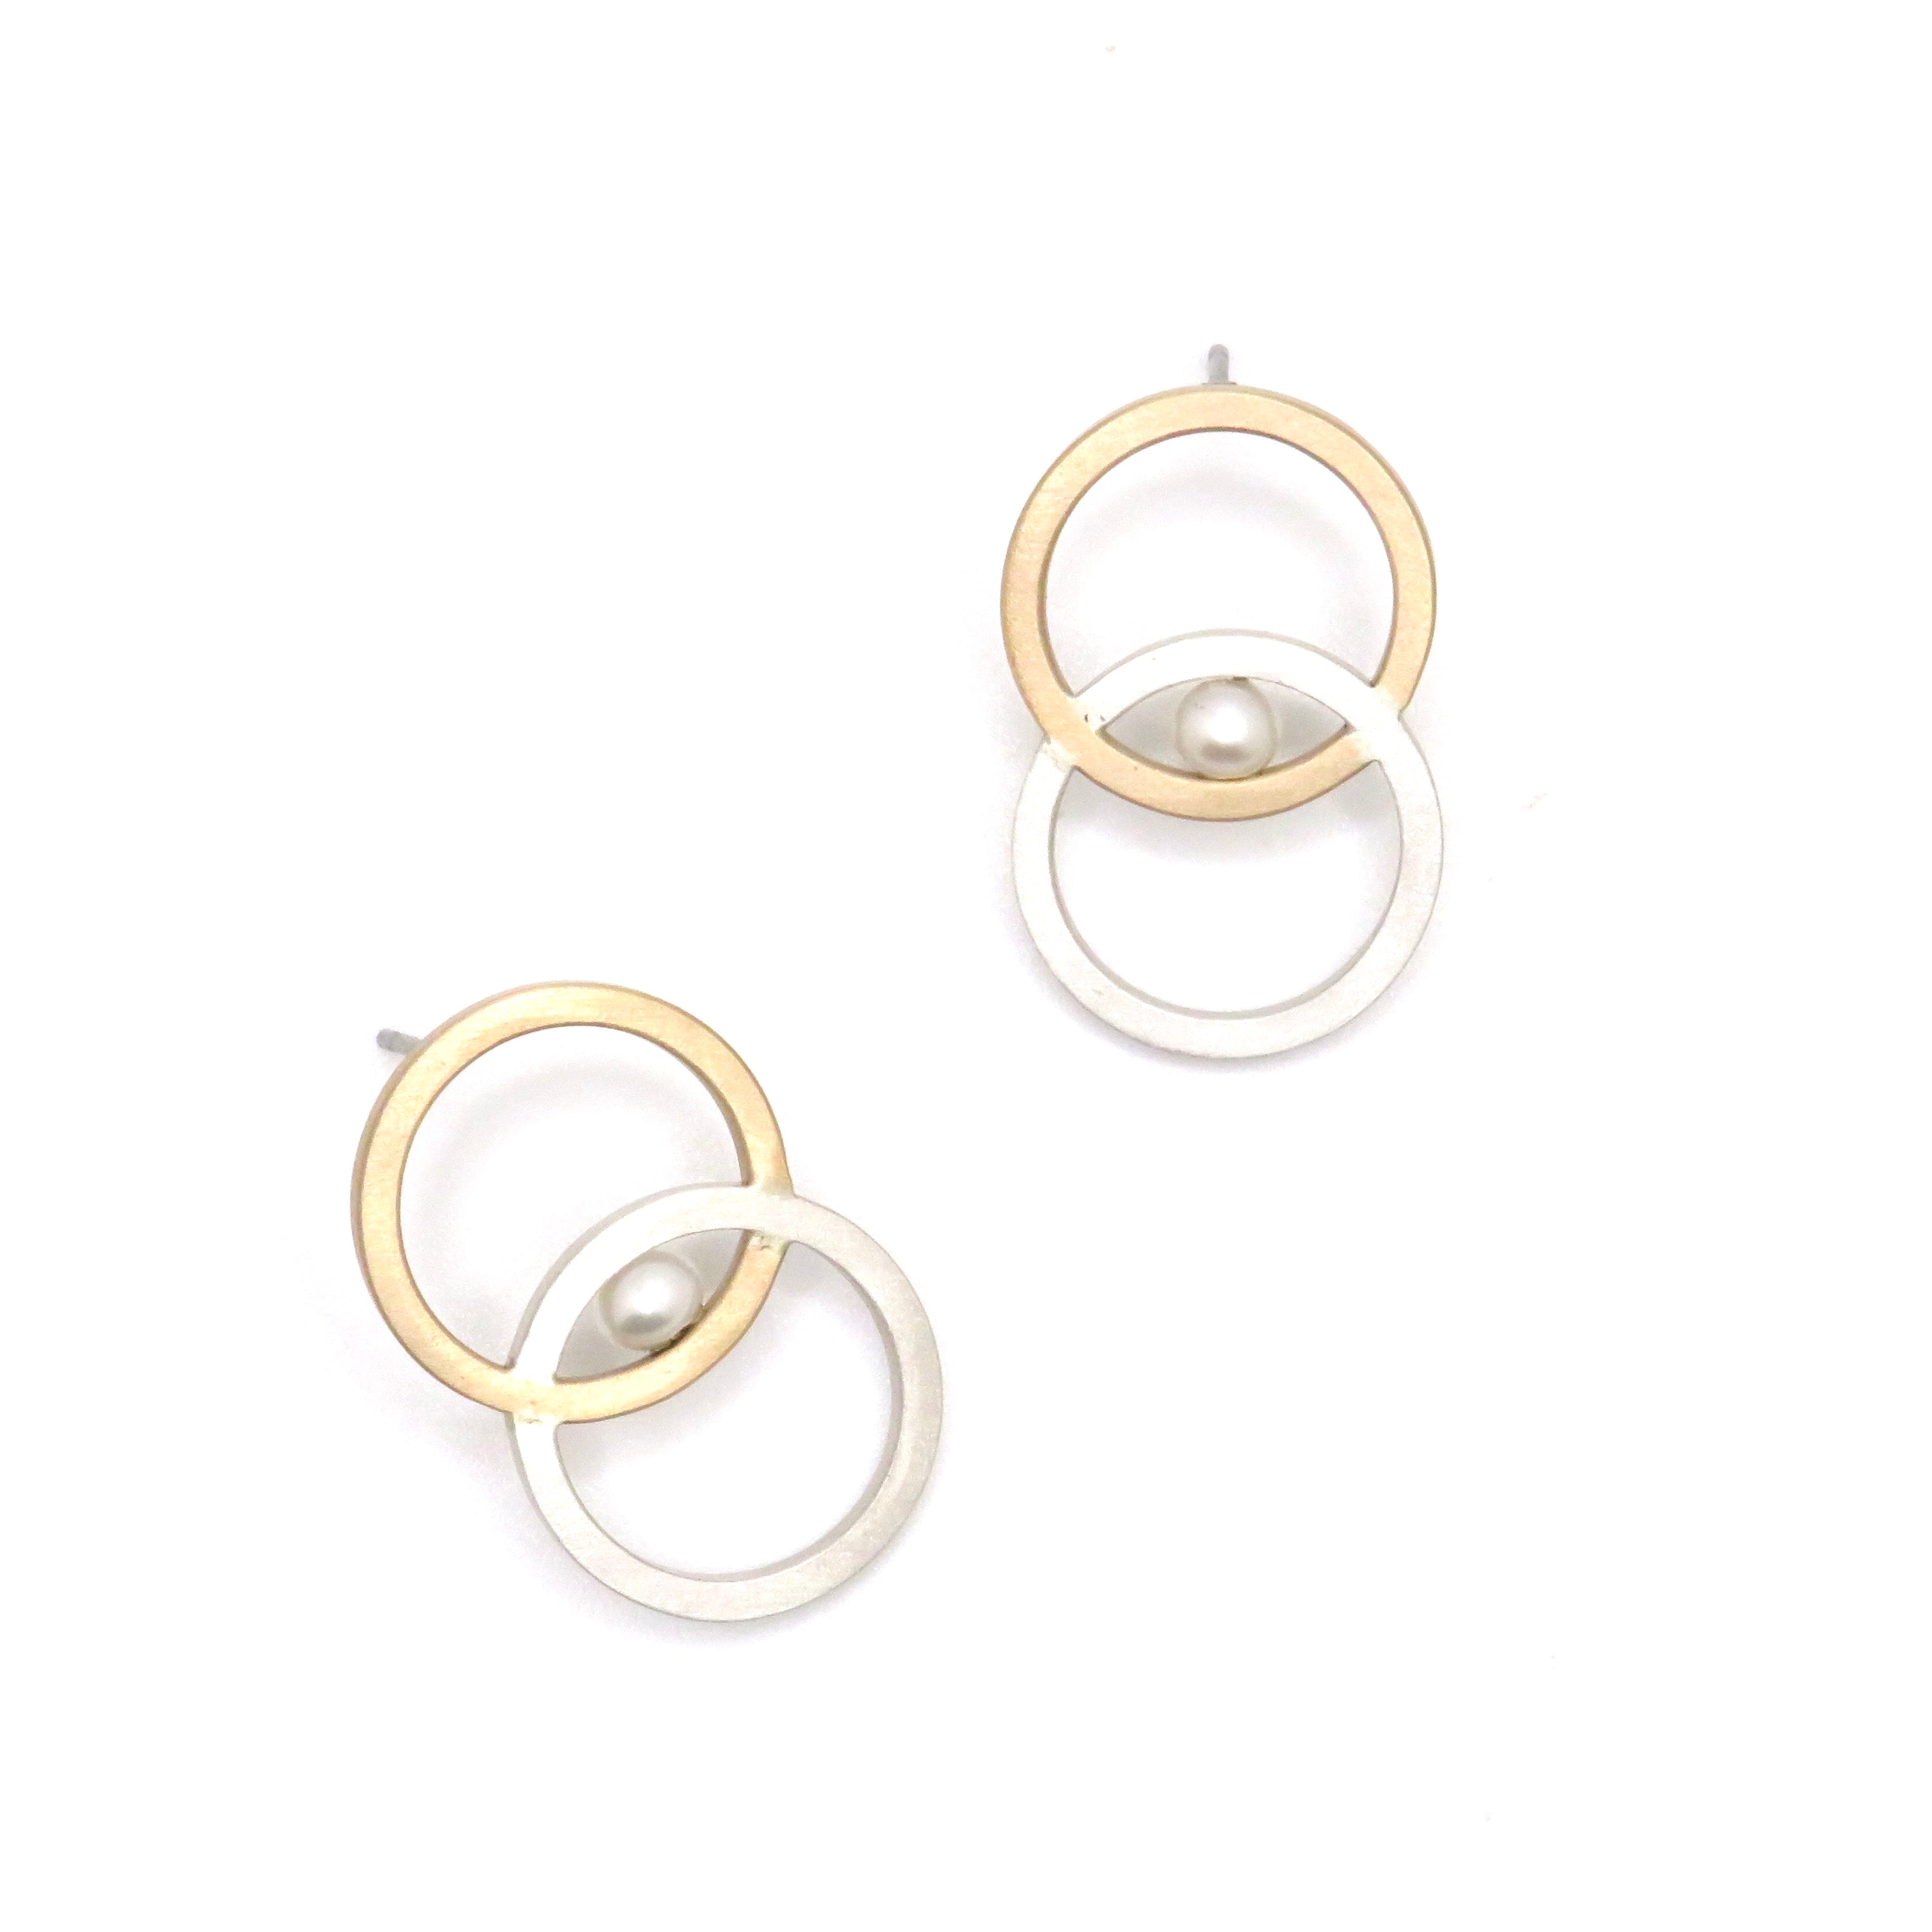 Brushed Sterling Silver, Gold Fill, and Pearl Rings Earrings